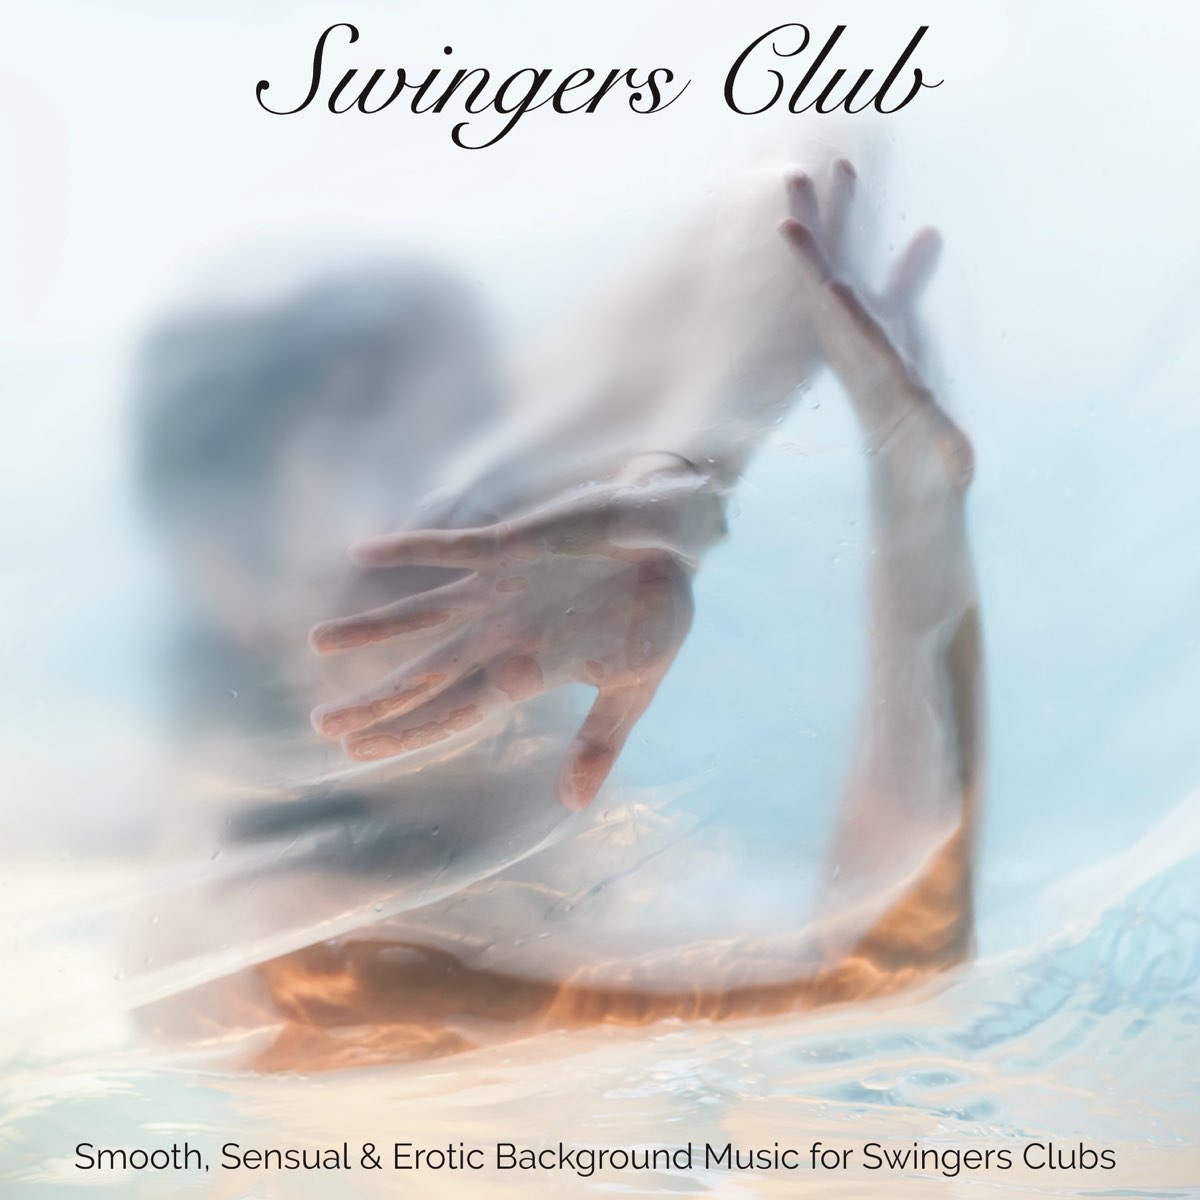 Swingers Club Smooth, Sensual and Erotic Background Music for Swingers Clubs - Album by Erotic Lounge Buddha Chill Out Music Cafe image pic